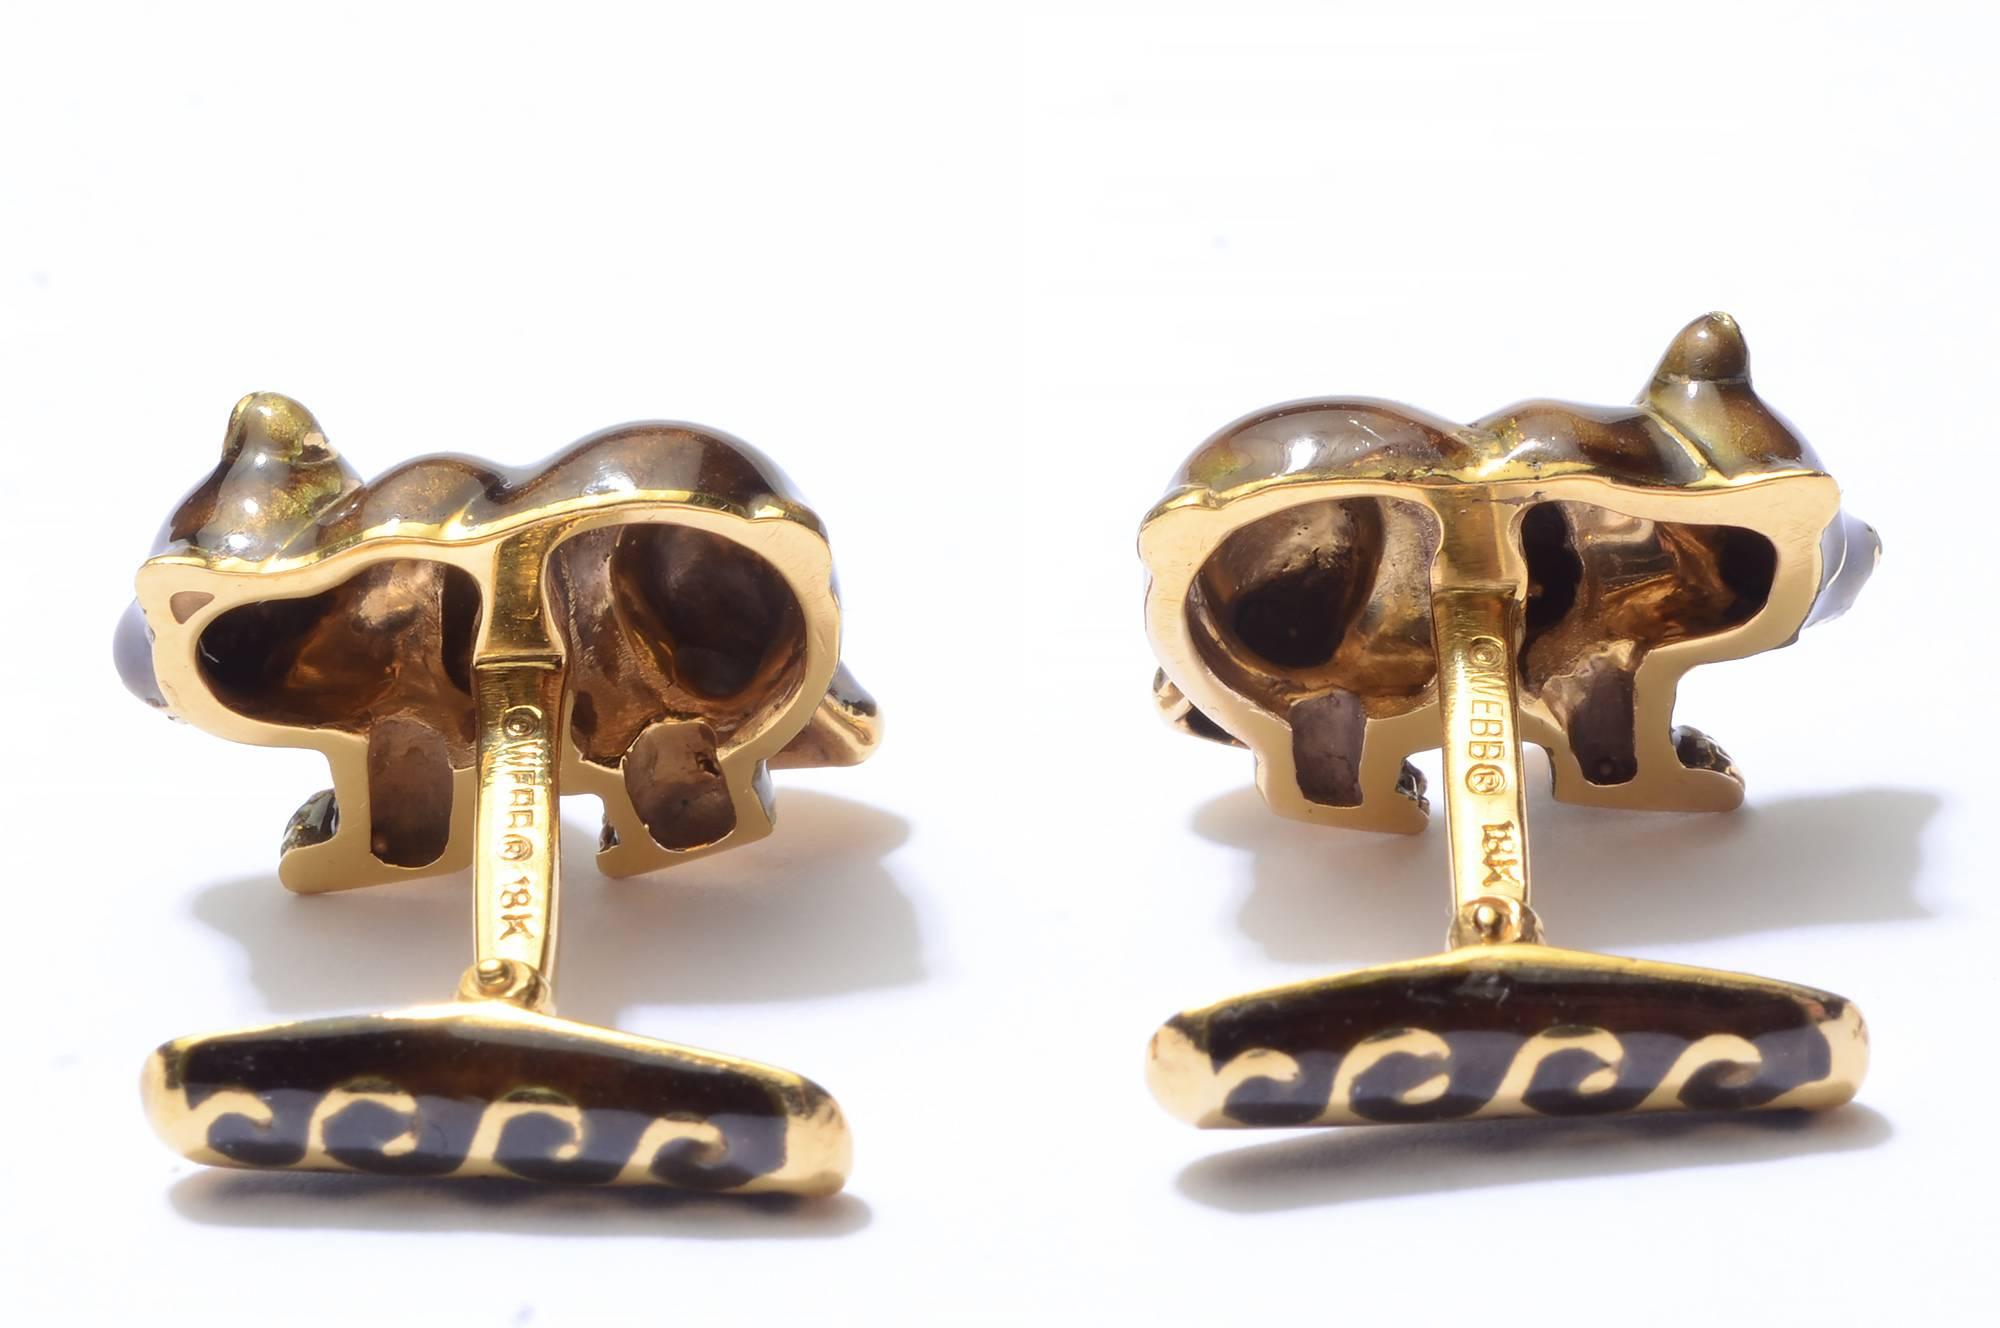 Brown bear enamel cufflinks by David Webb are perfect miniature sculptures. The gleaming eyes are diamonds. The toggle is beautifully decorated. For the stock trader, these cufflinks are the natural counterpoint to item LU1331431333, the Webb Bear